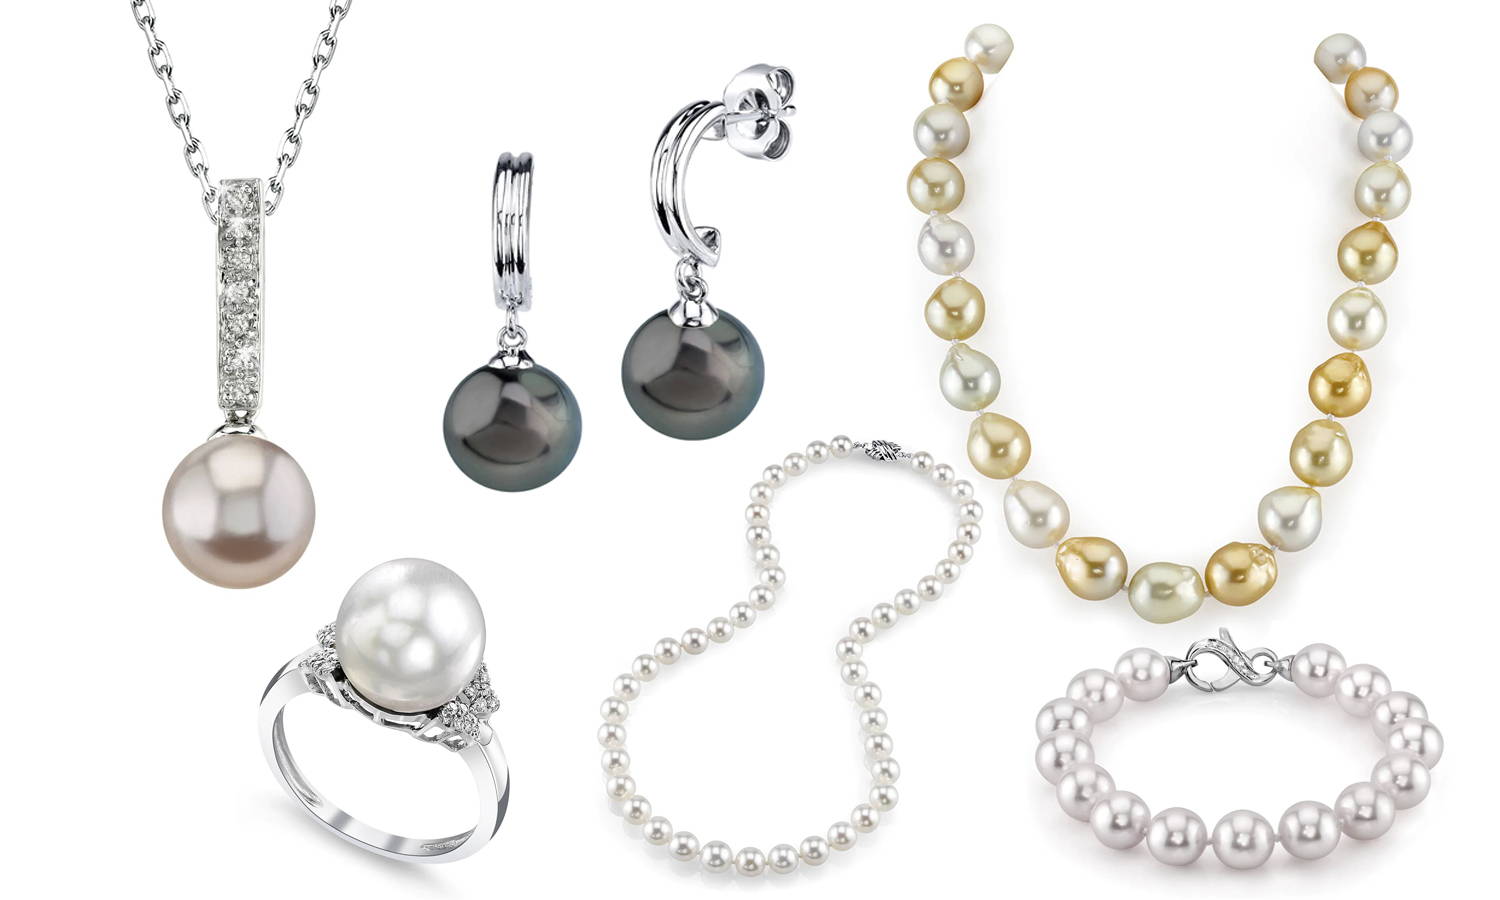 Various Pearl Jewelry Designs from Pearls of Joy